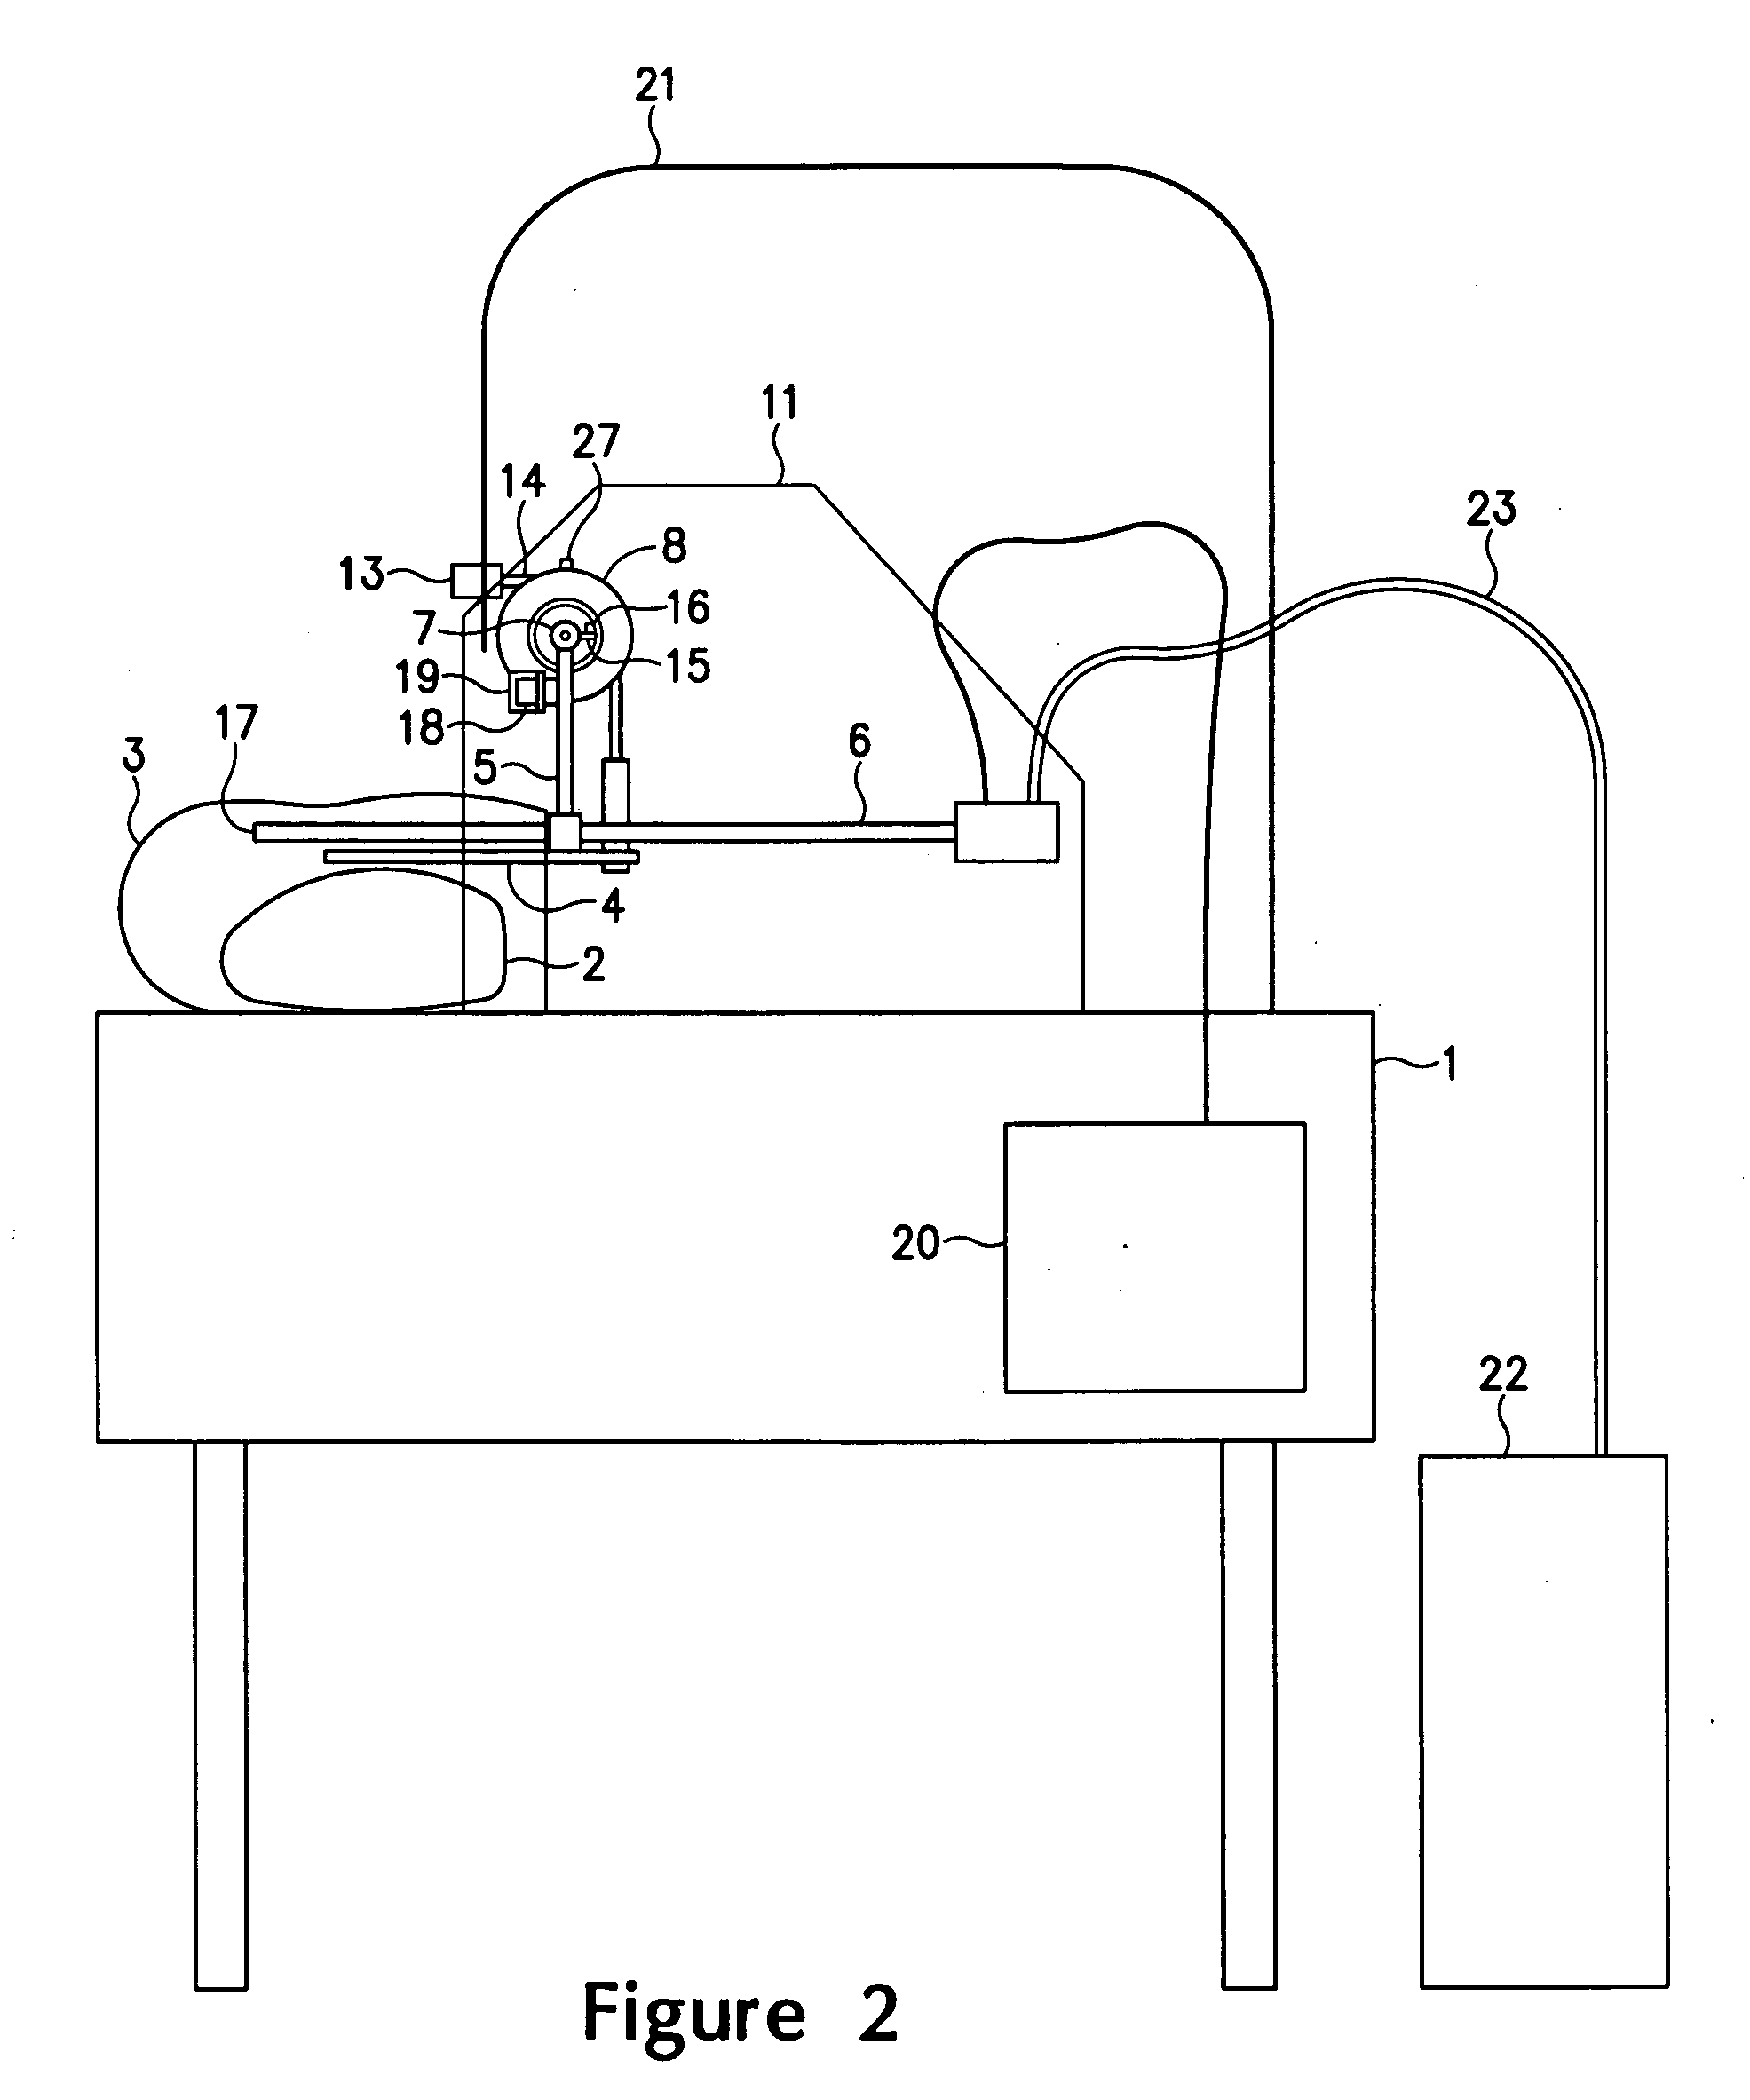 Method and apparatus for treatment of food products